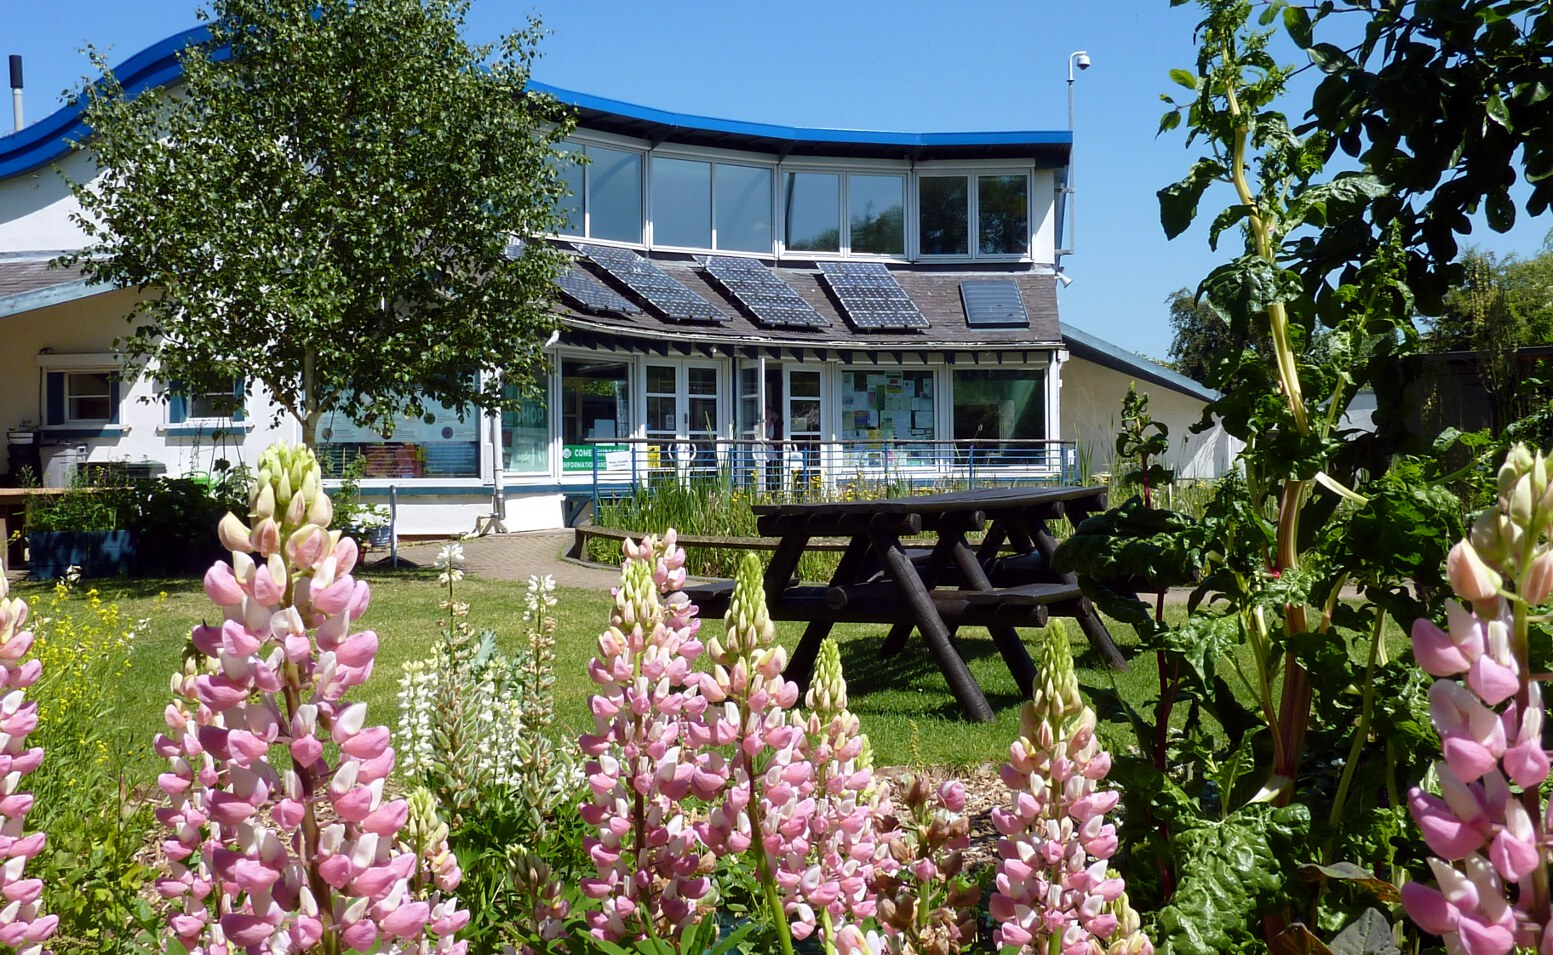 Environment centre and pond with lupin flowers